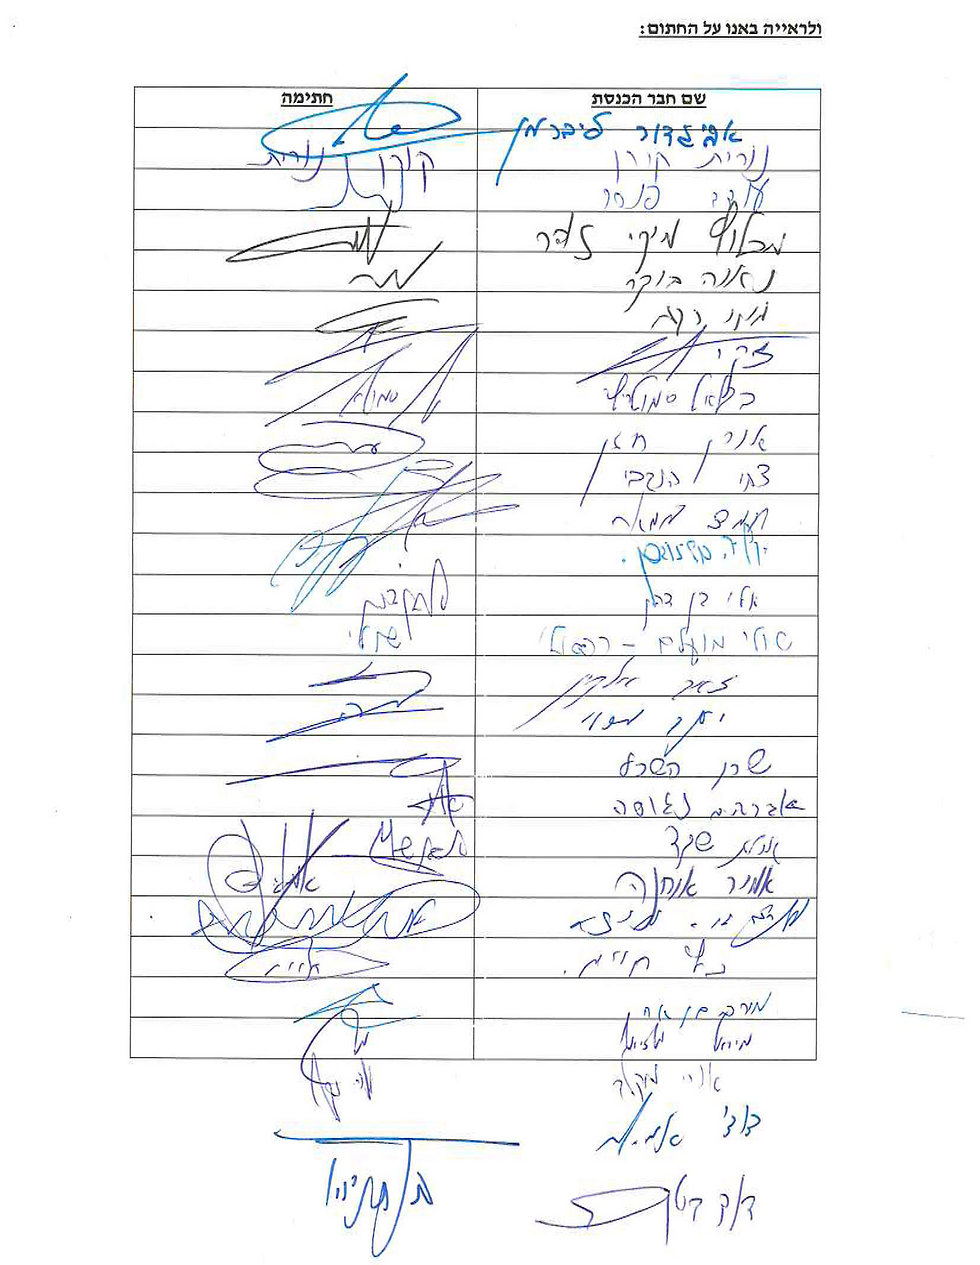 The prime minister, ministers and MKs' signatures